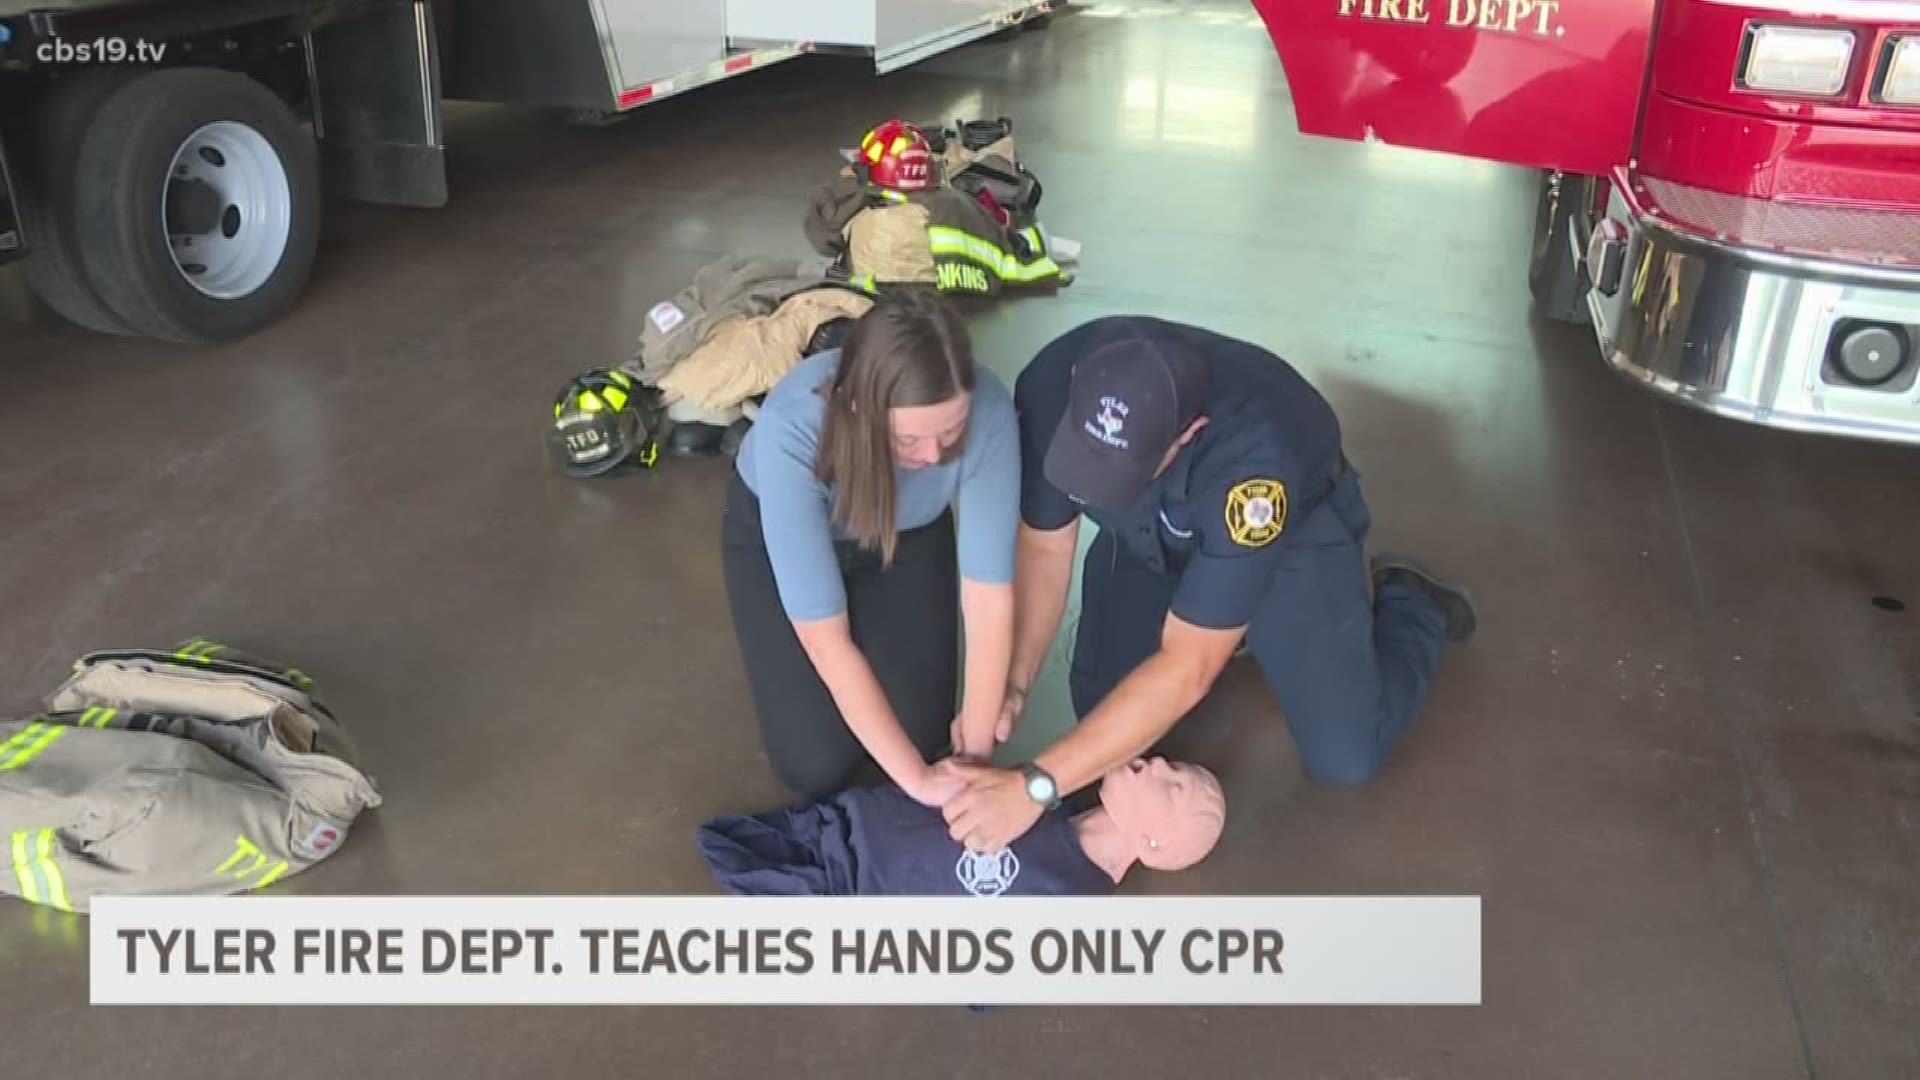 The Tyler Fire Department demonstrated to CBS19's Payton Weidman how easy and quick it is to learn hands only CPR.